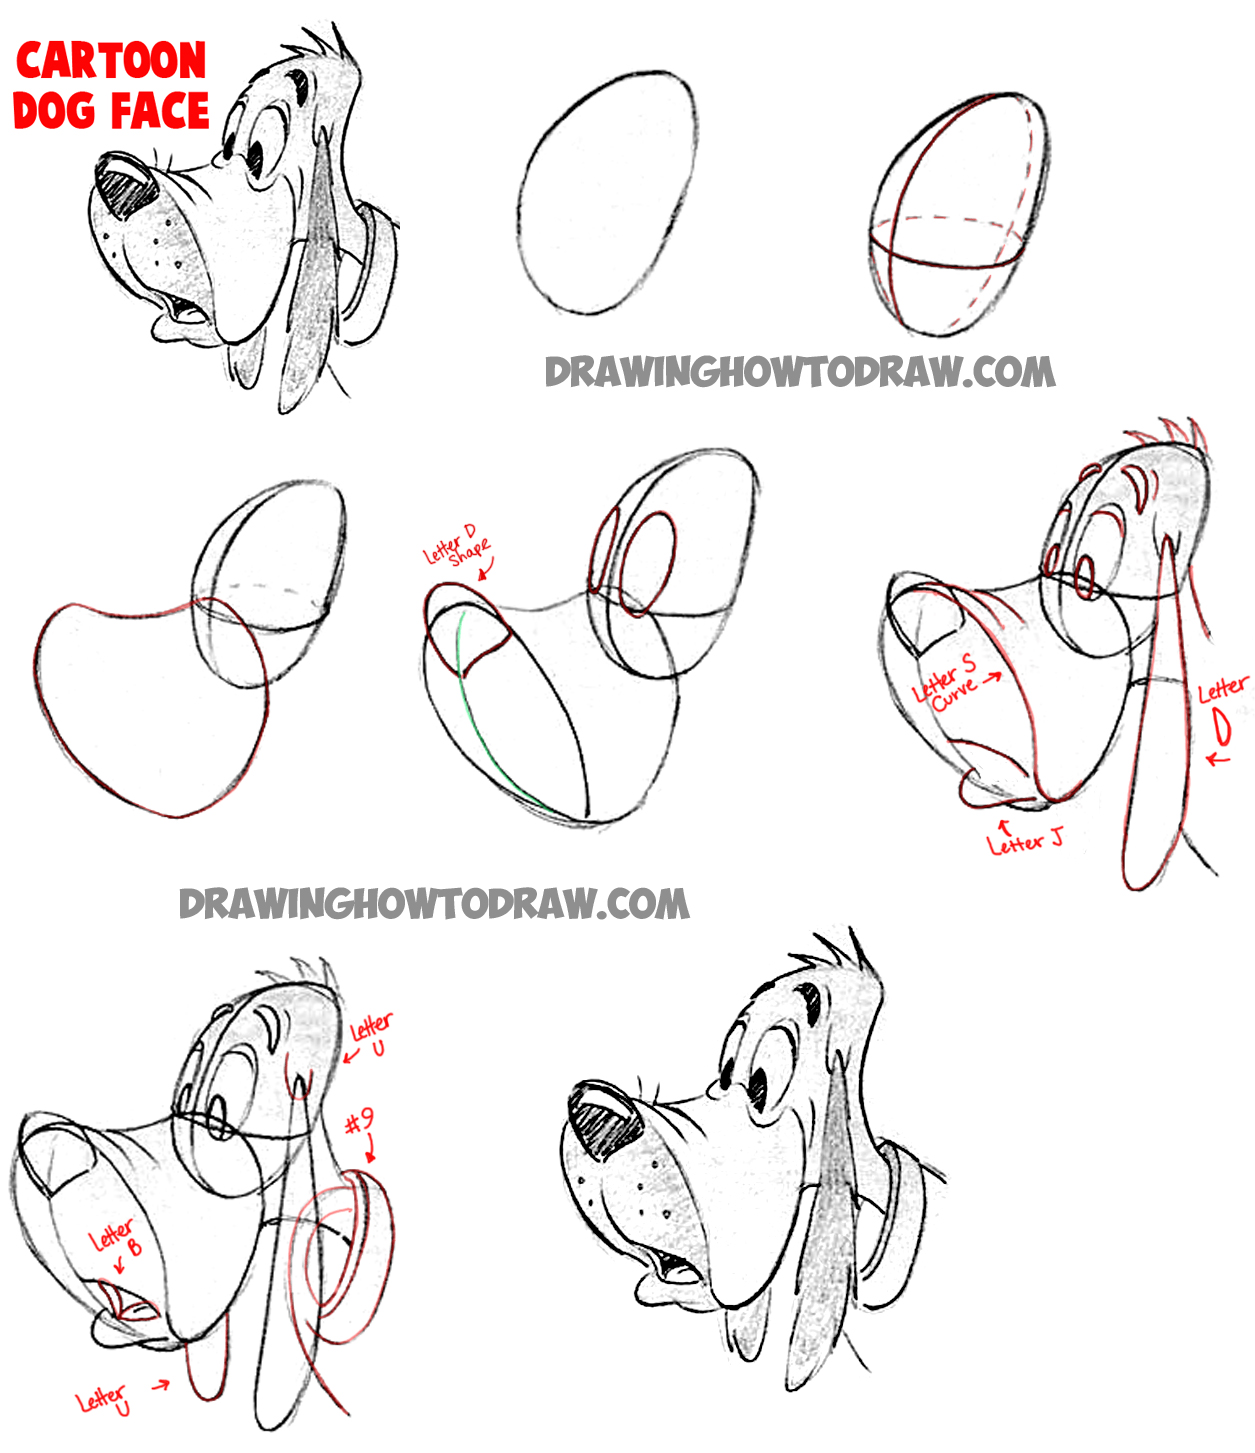 How To Draw Cartoon Dogs Face And Head In Easy Steps Lesson How